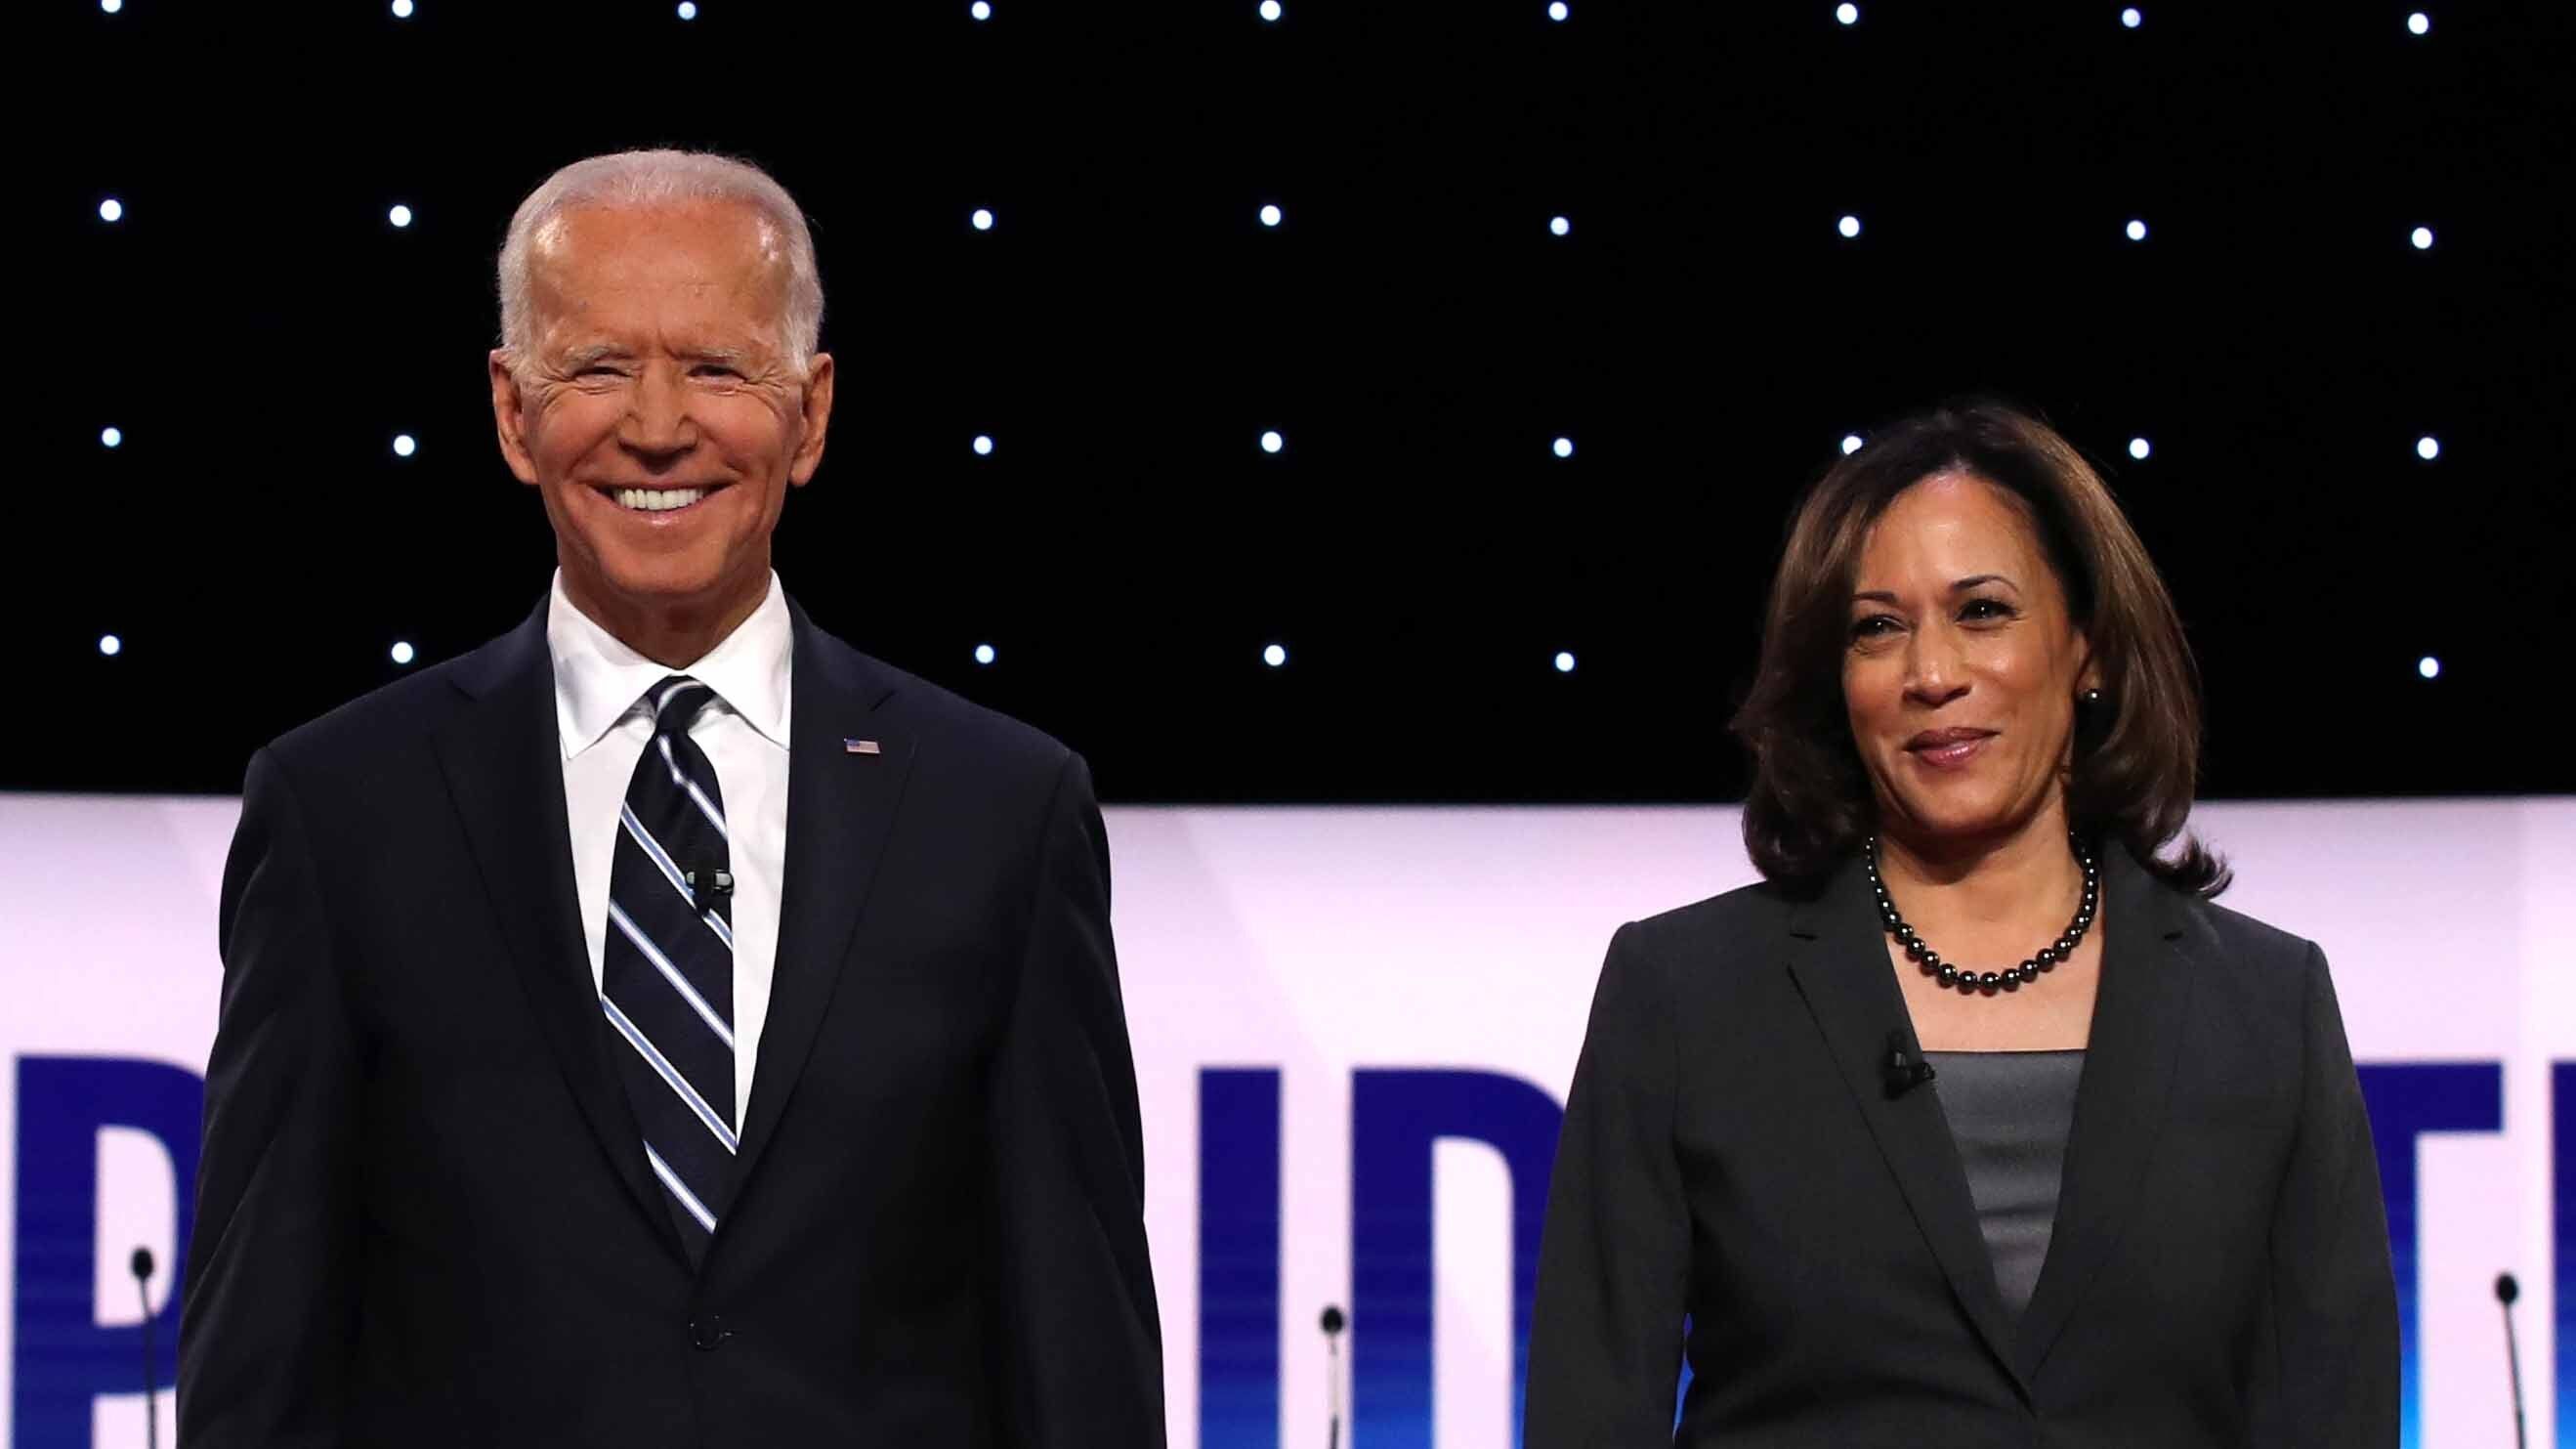 Joe Biden Says Kamala Harris Will Tell Him When He's Wrong in First Joint Interview